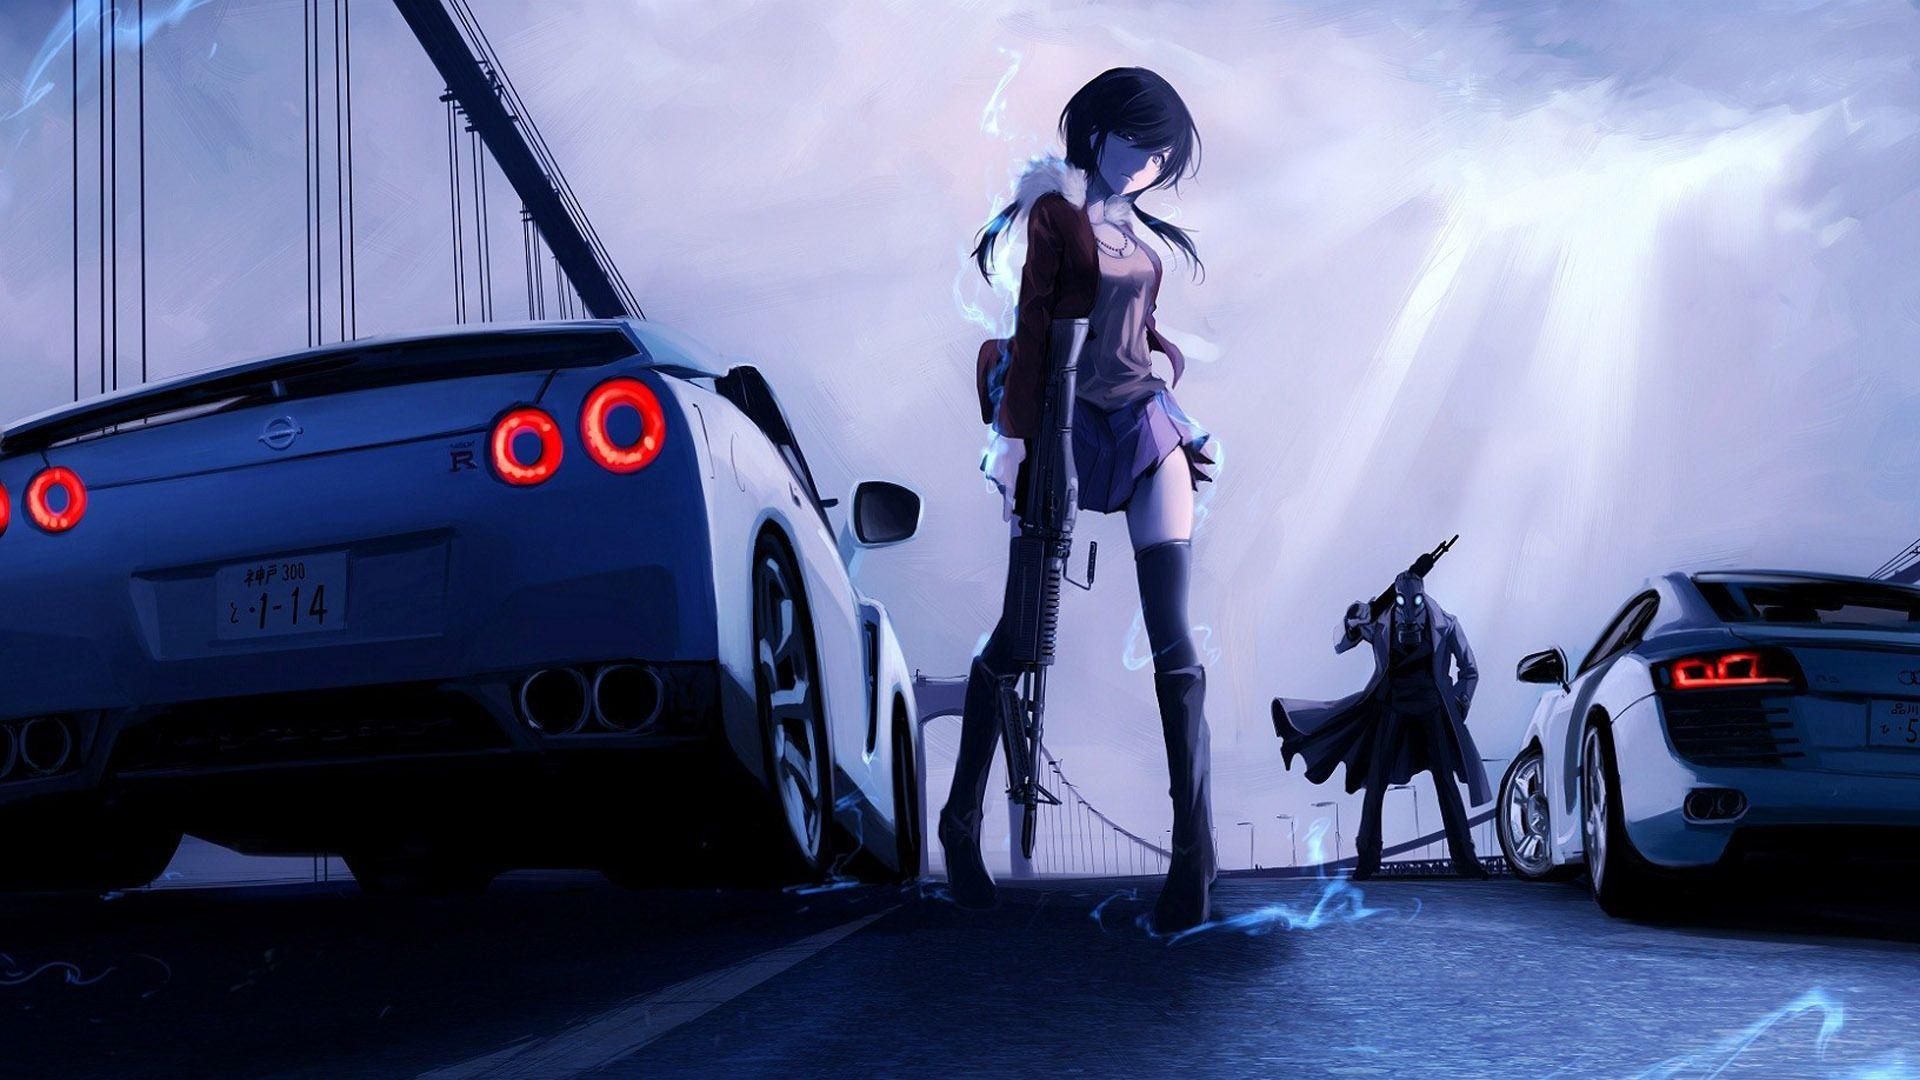 Awesome car tuning in anime style👍 | Anime Amino